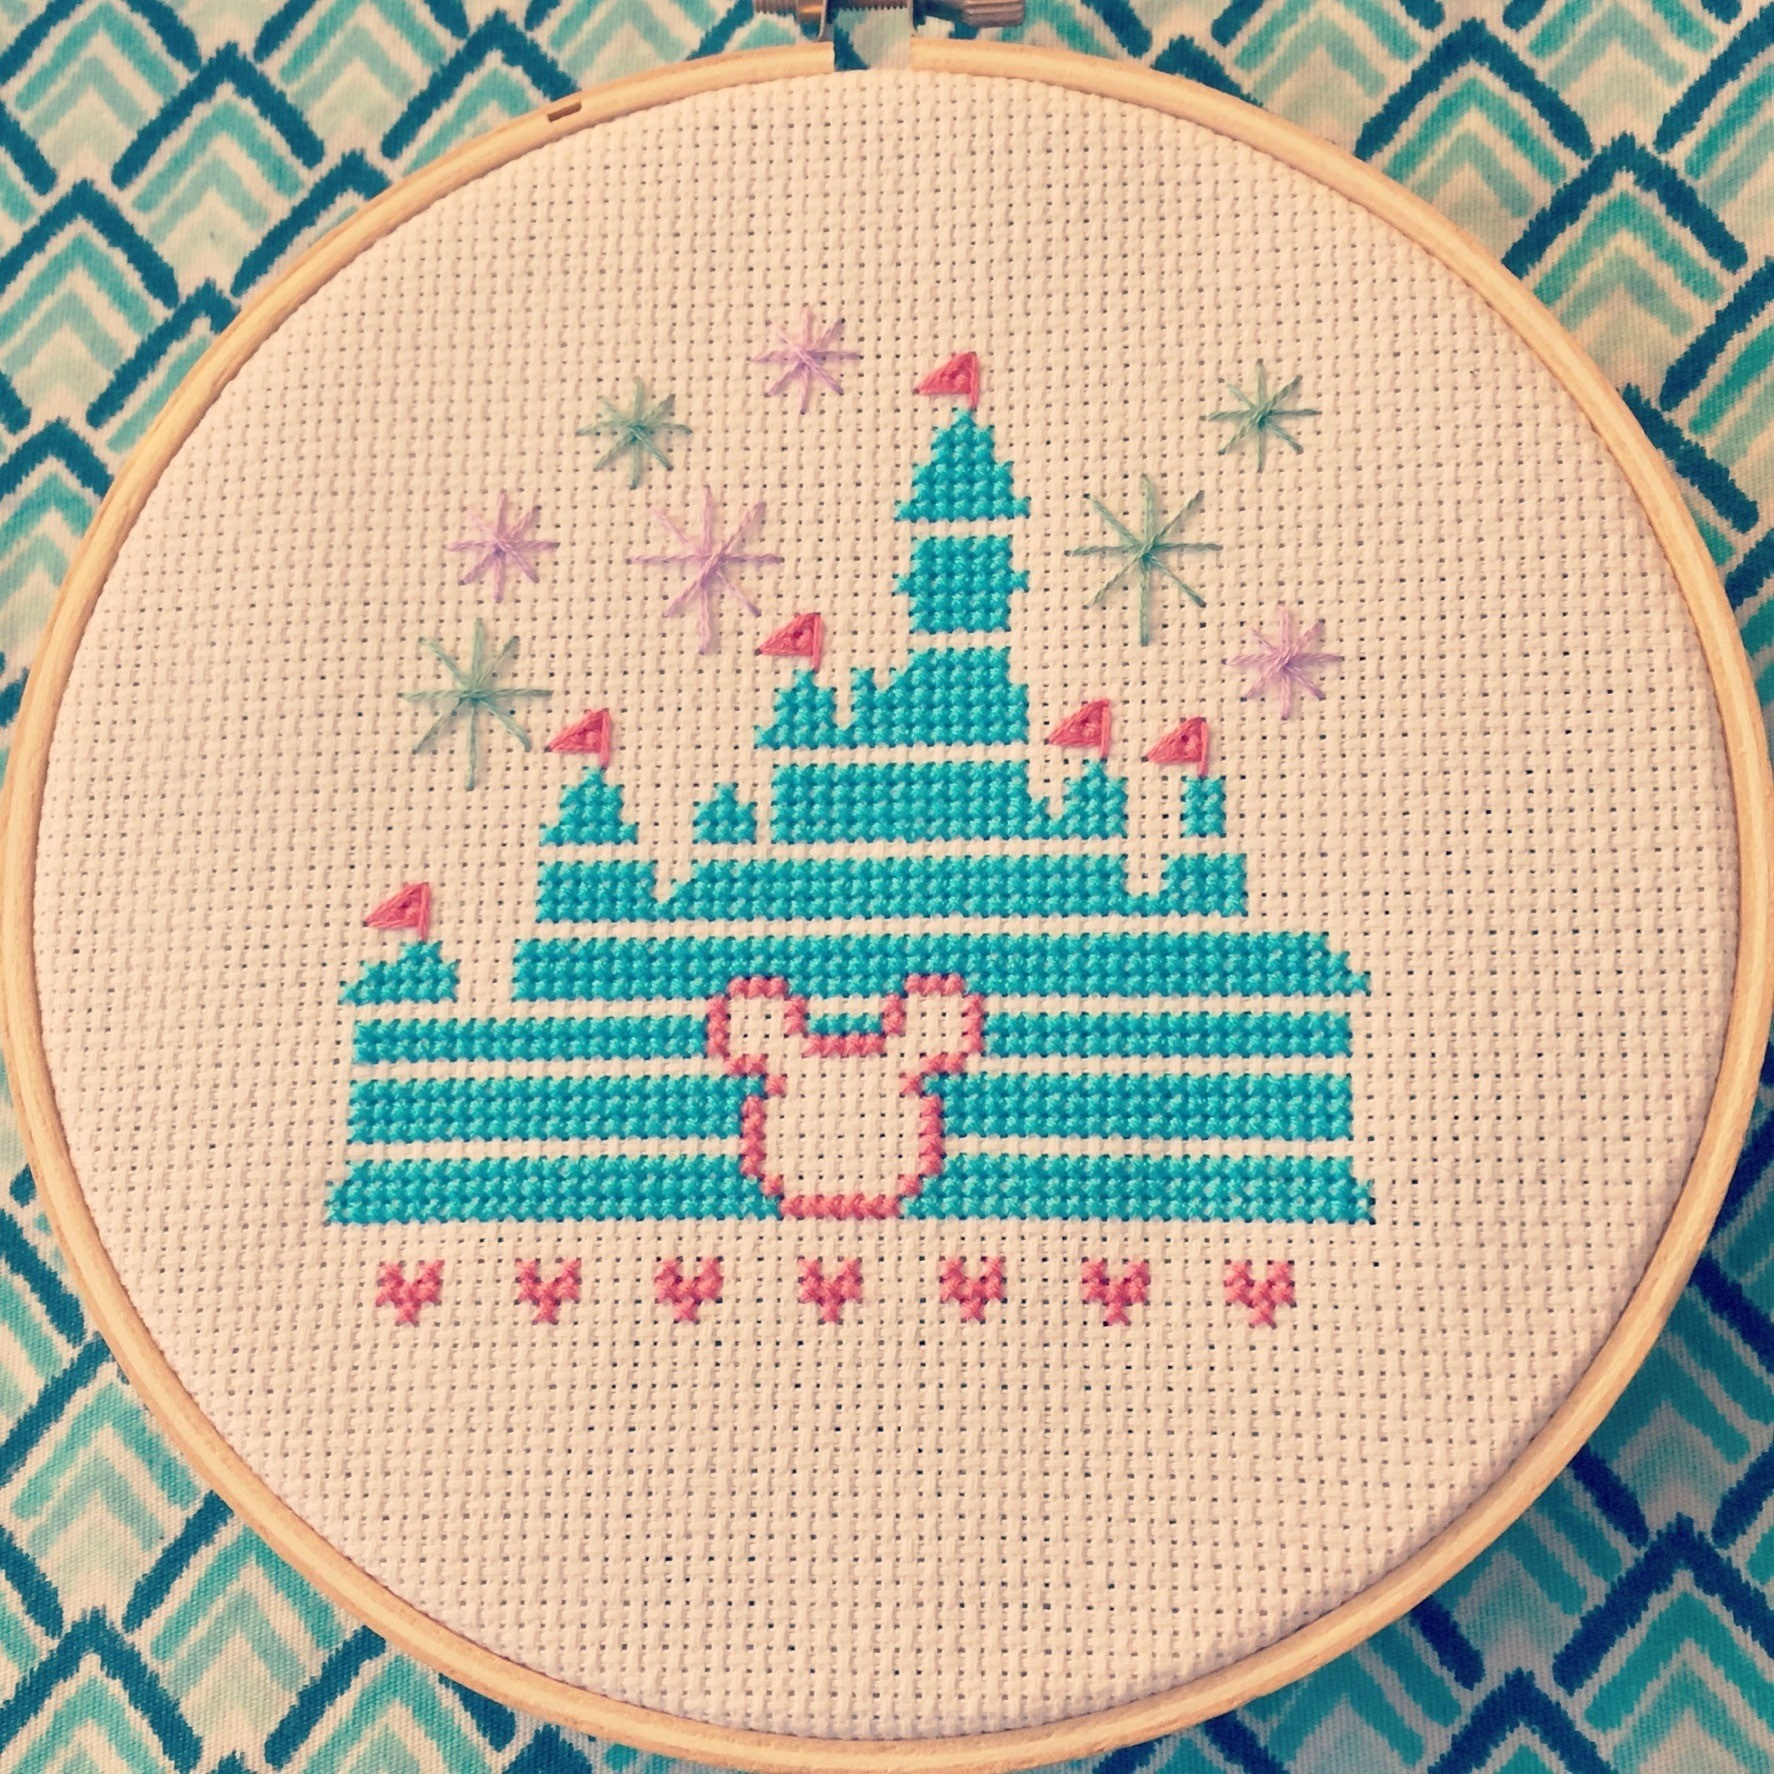 Disney Embroidery Patterns Magical Disney Castle Cross Stitch How To Cross Stitch